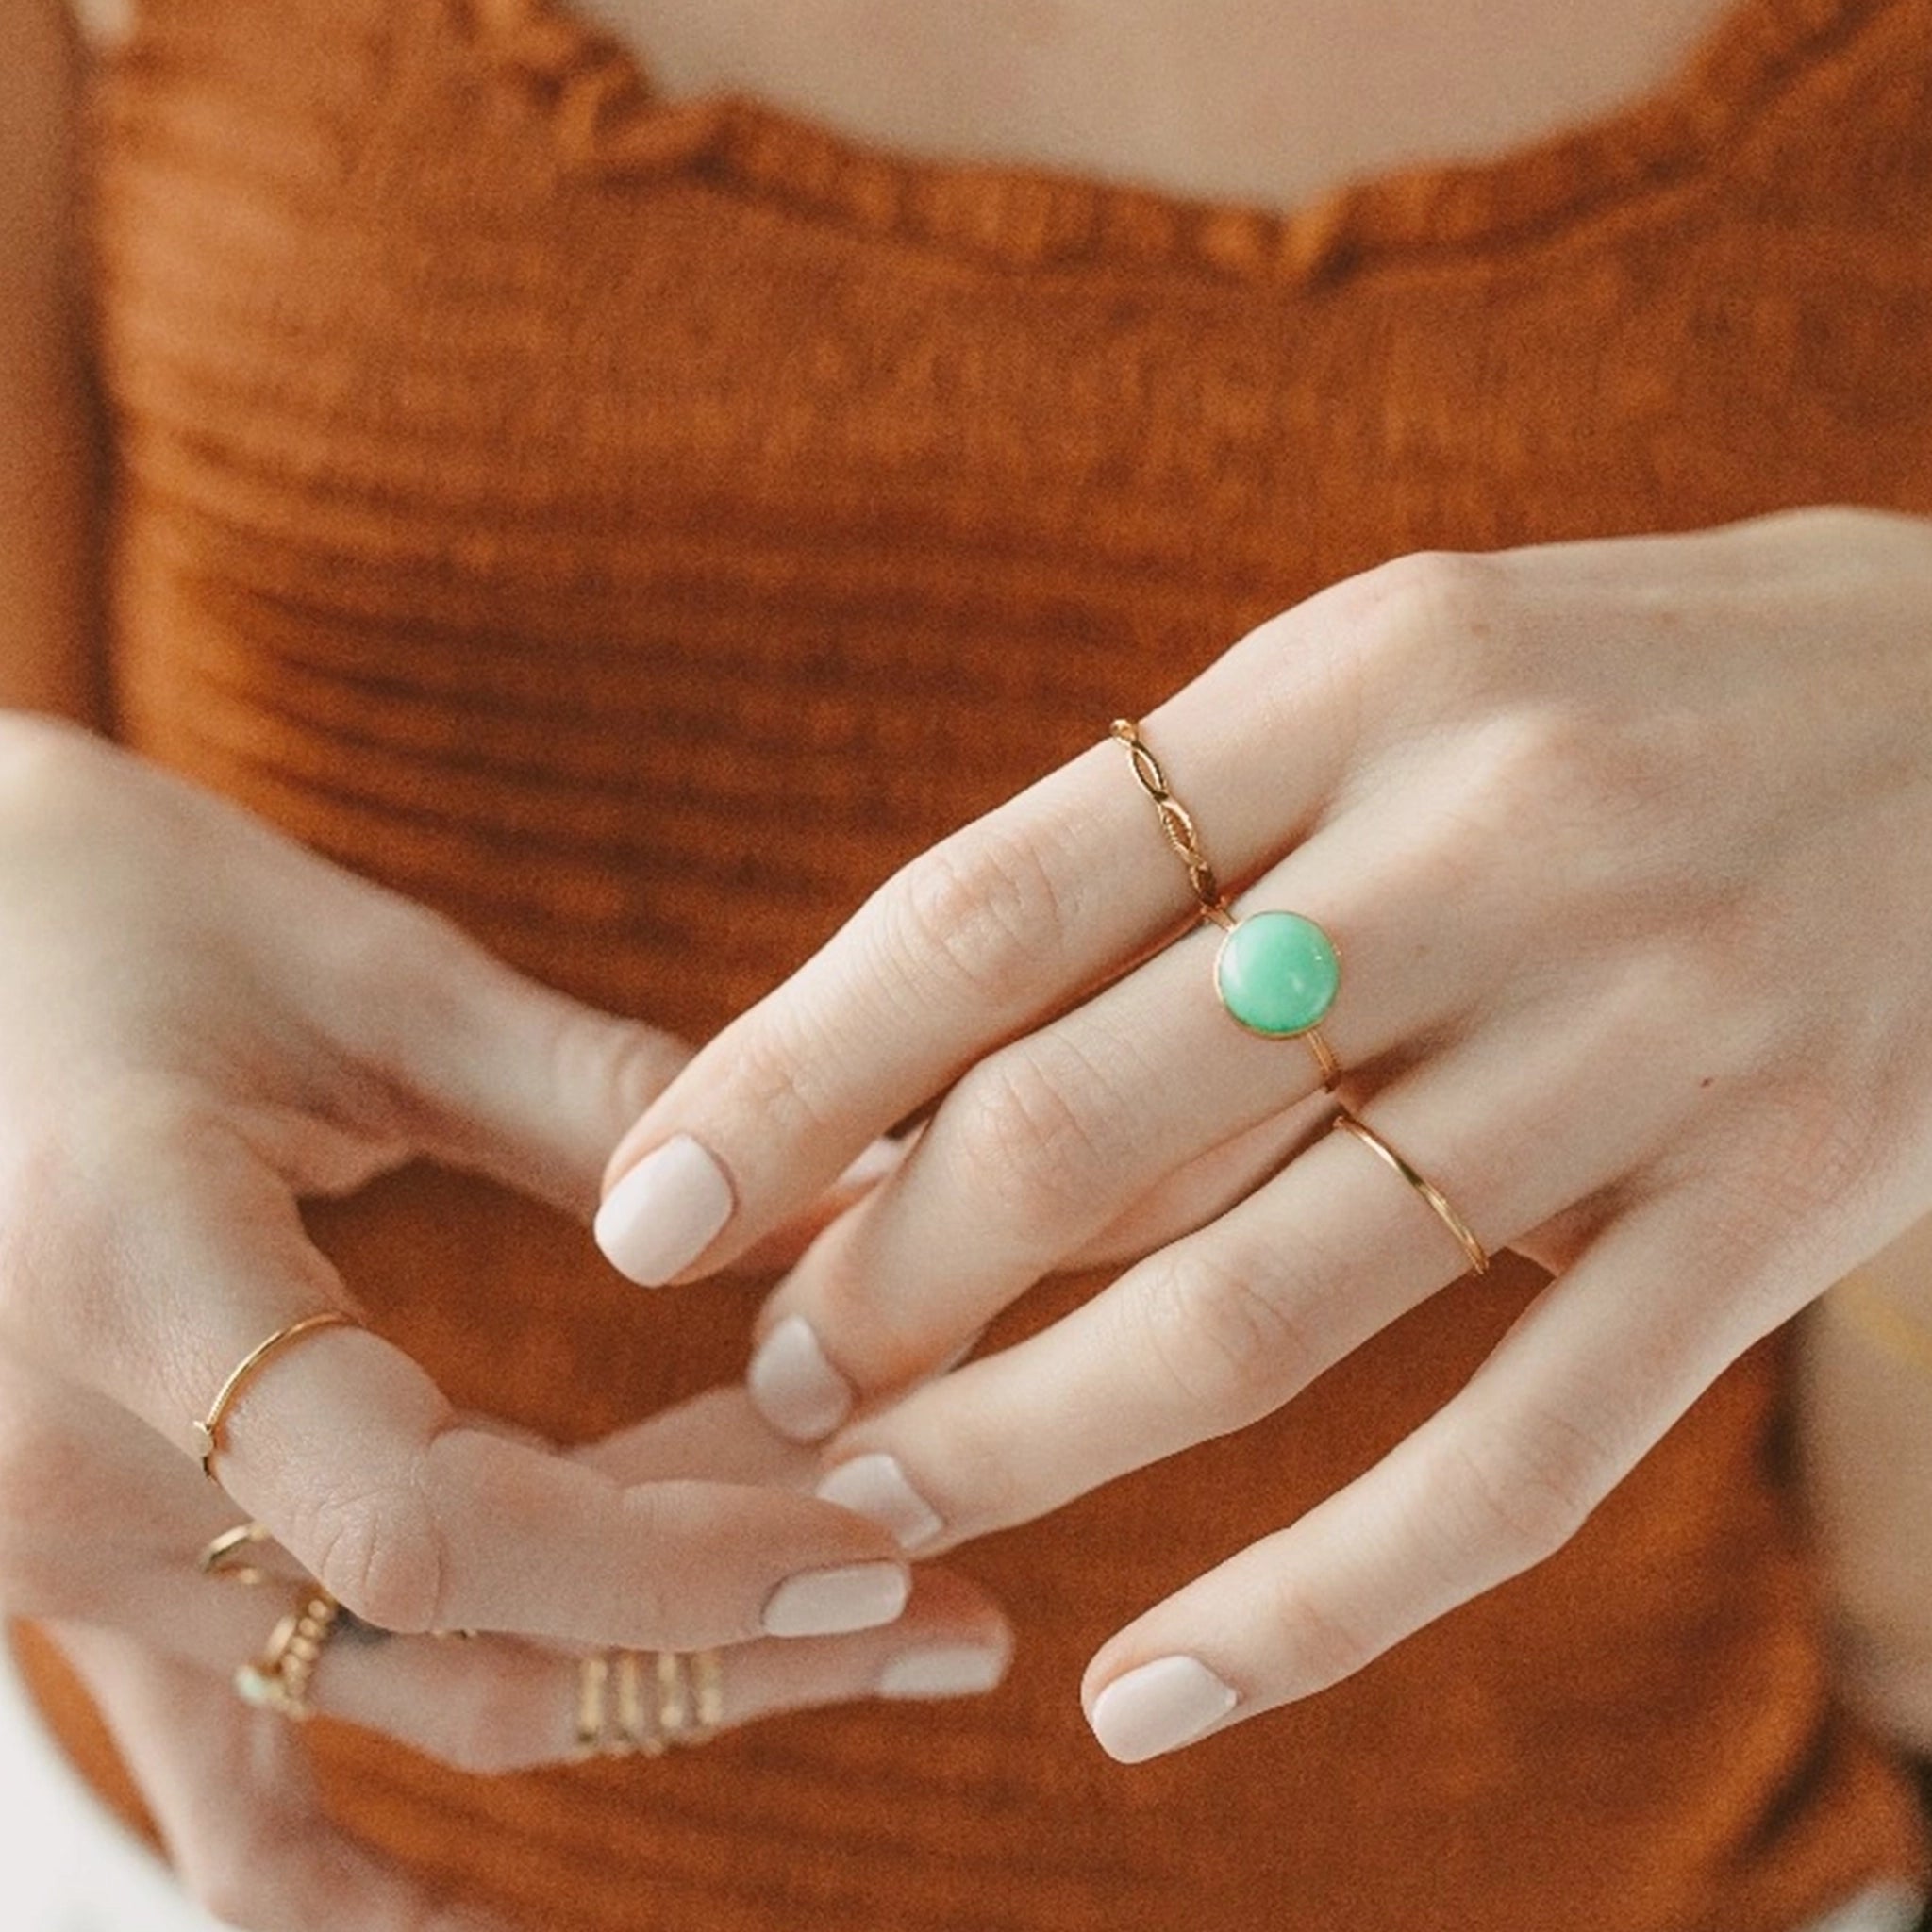 A thin gold ring with a green chrysoprase stone in the center.